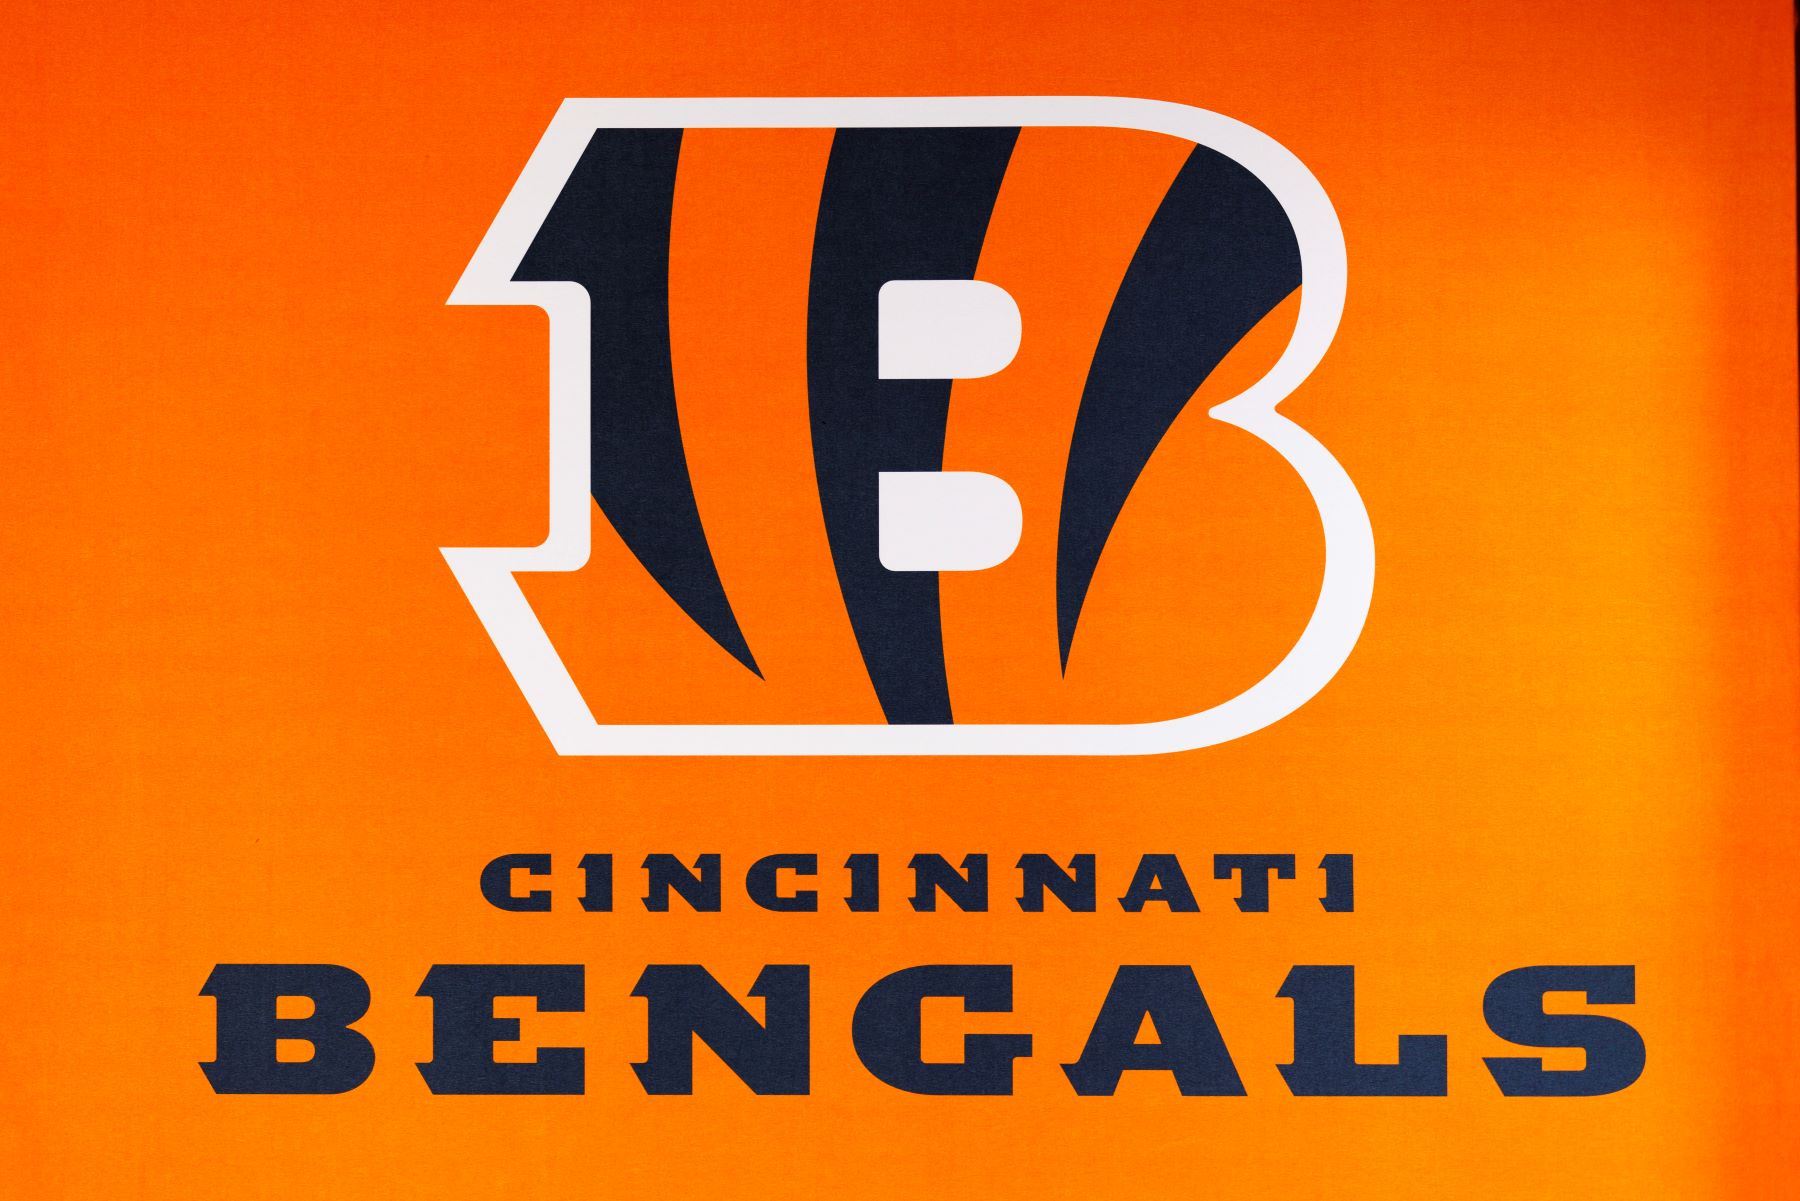 NFL team Cincinnati Bengals logo seen at the Los Angeles Convention Center during the Super Bowl Experience